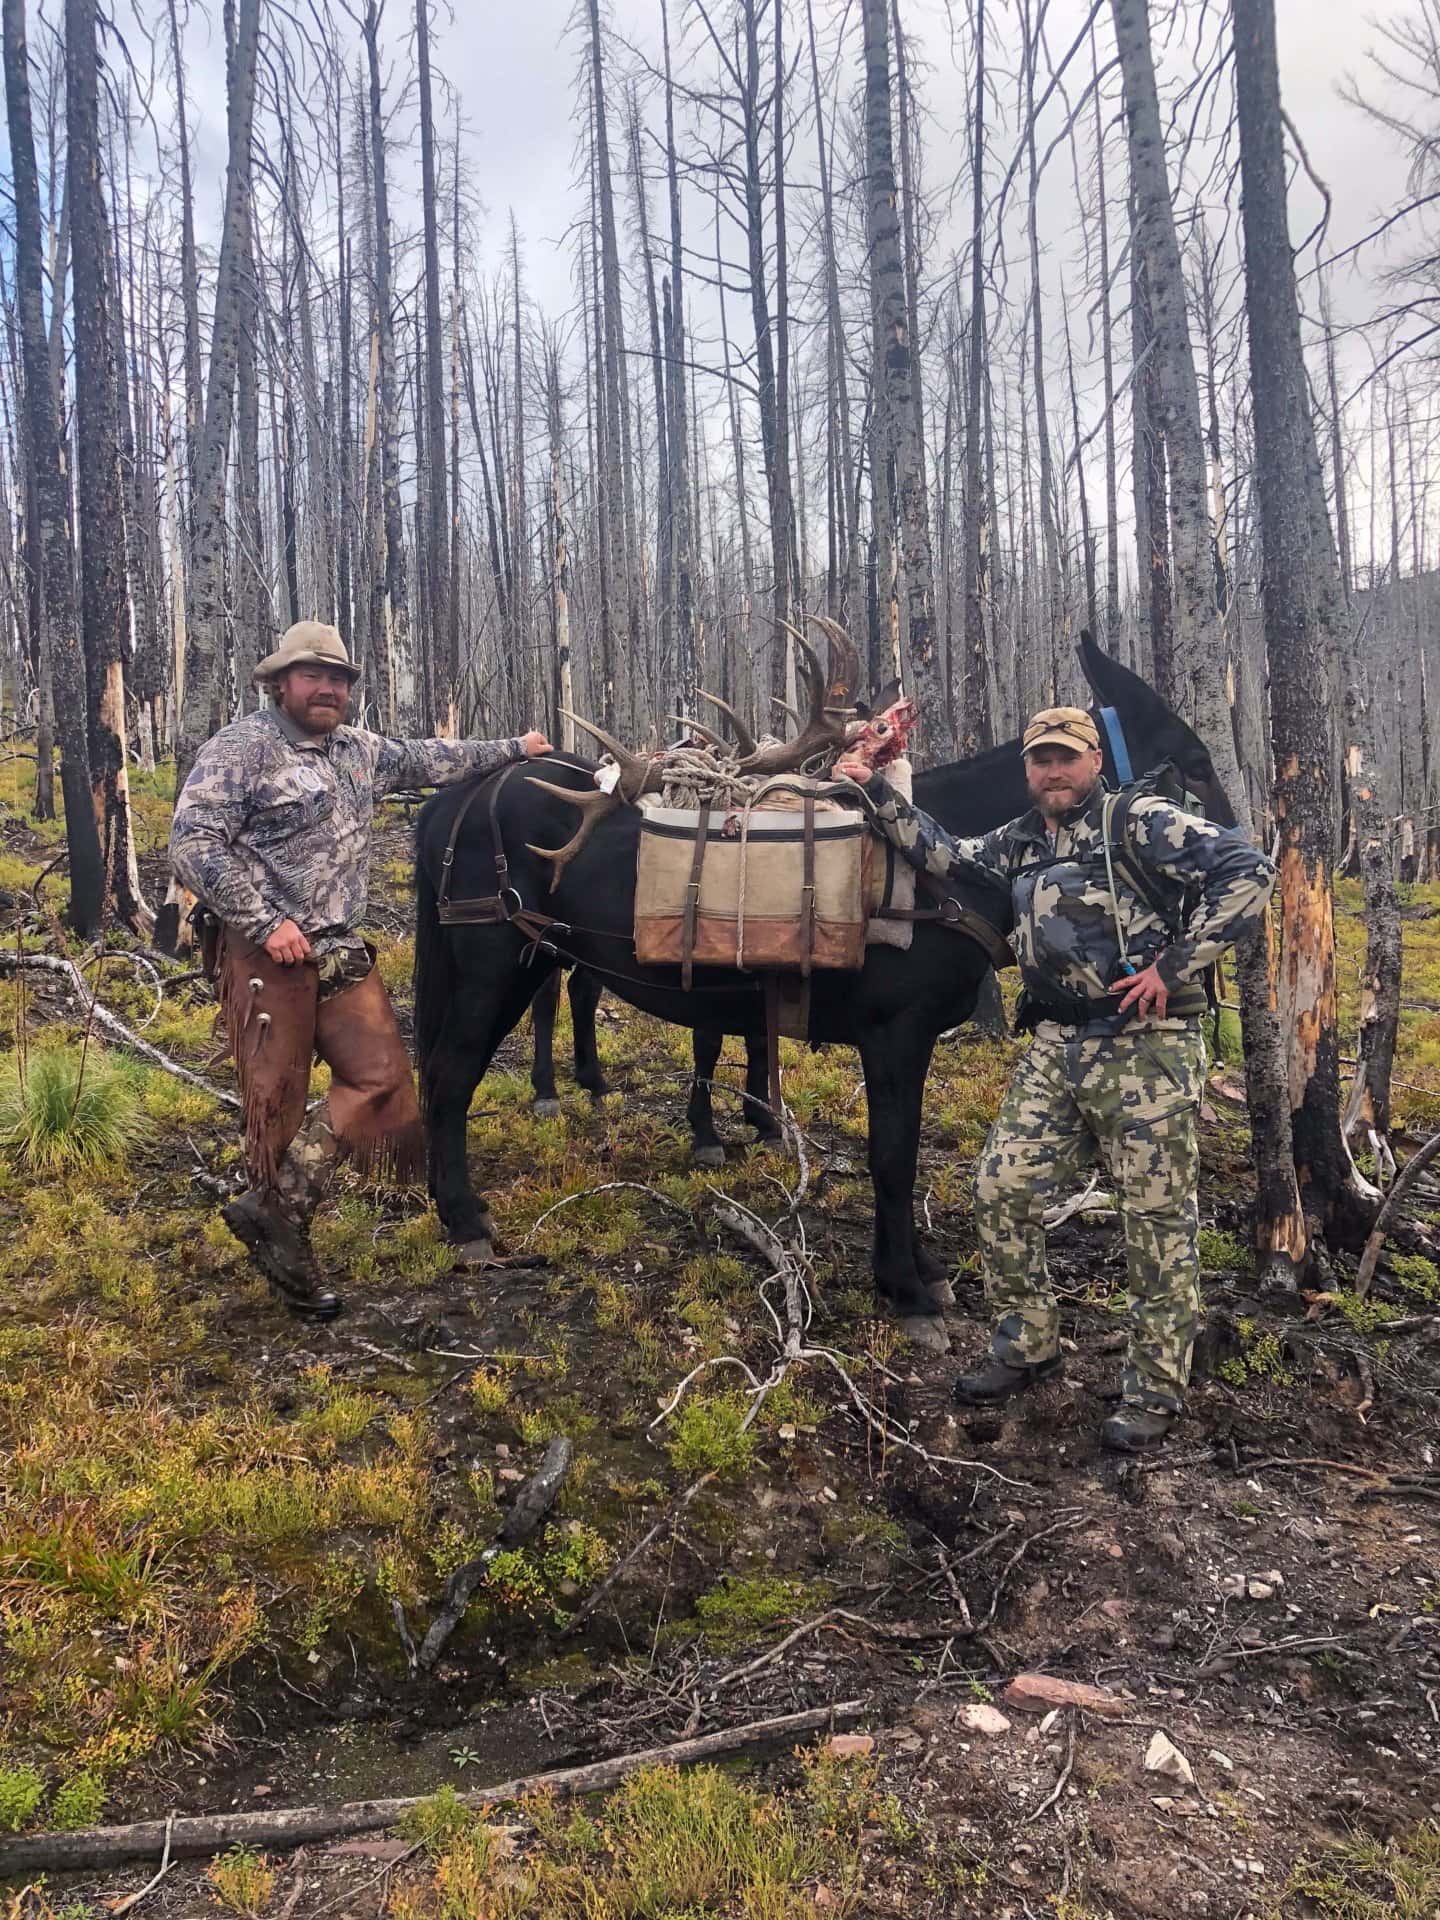 wilderness elk hunting montan awilderness lodge and outfitting